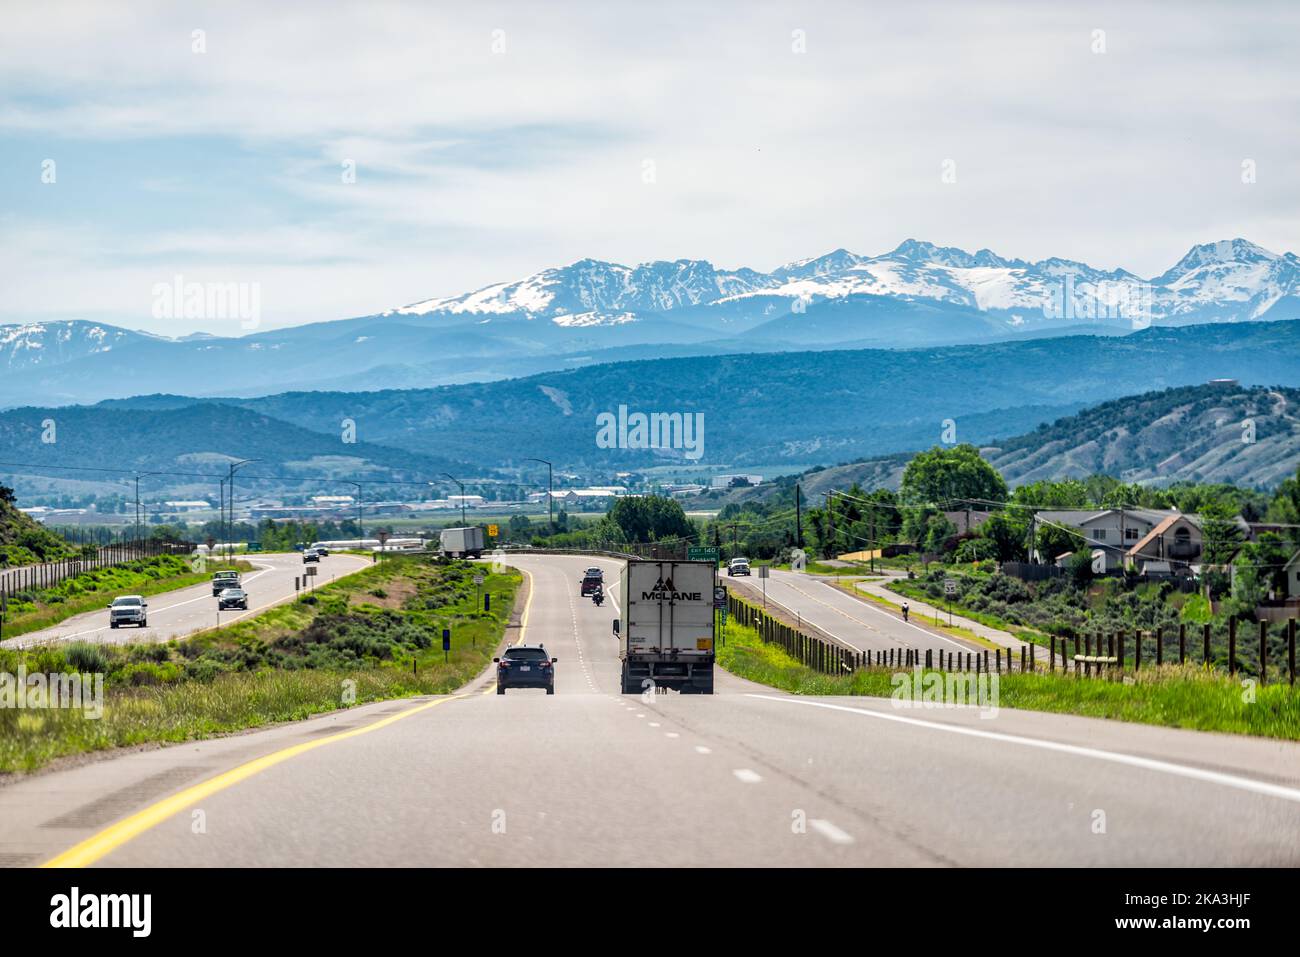 Gypsum, USA - June 29, 2019: Interstate i70 highway through Colorado's Western Slope with cars in traffic and driving point of view of snowcapped rock Stock Photo